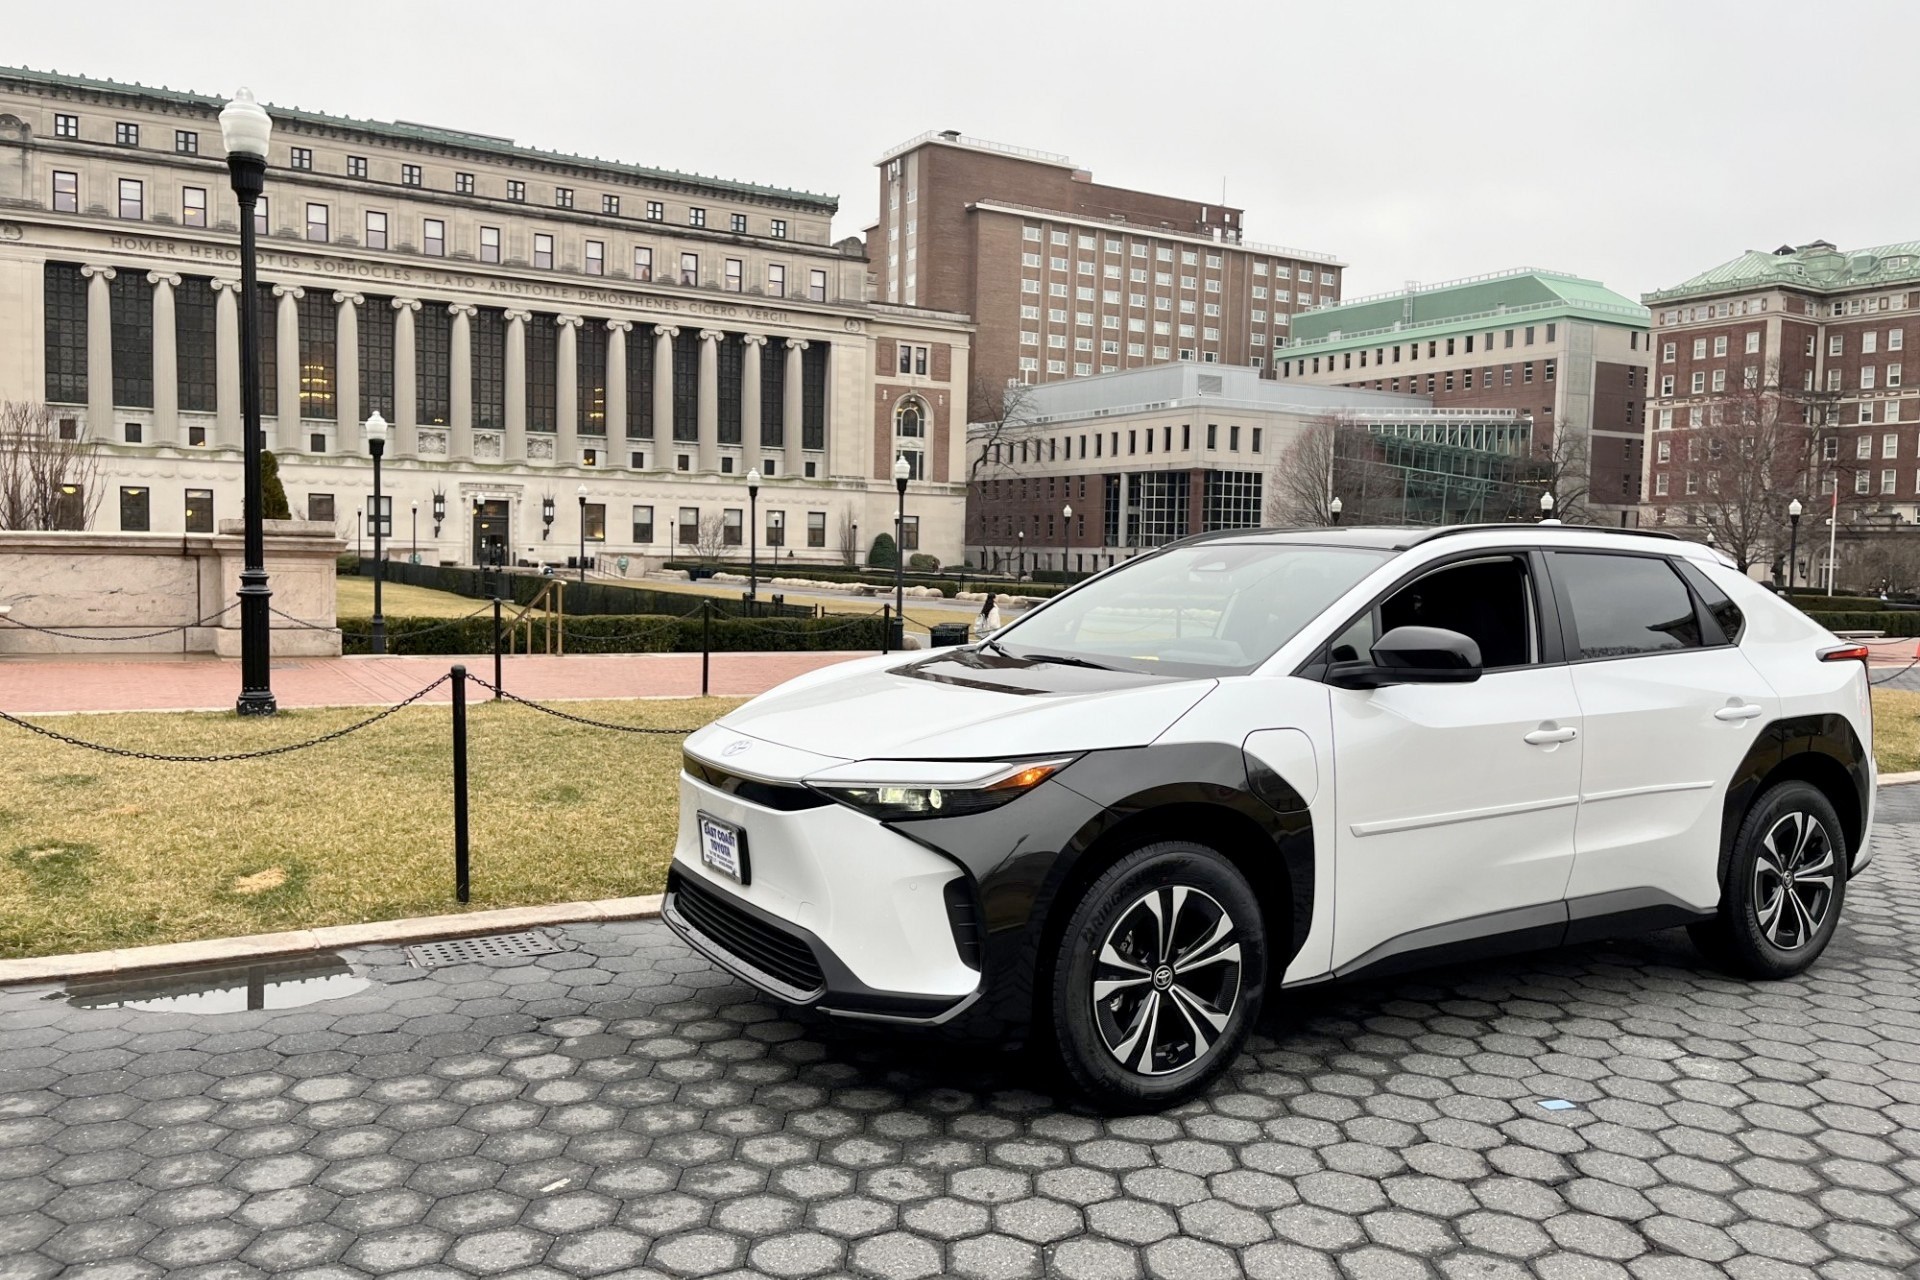 A new electric SUV for the Public Safety fleet is parked on College Walk, with Butler Library in the background.